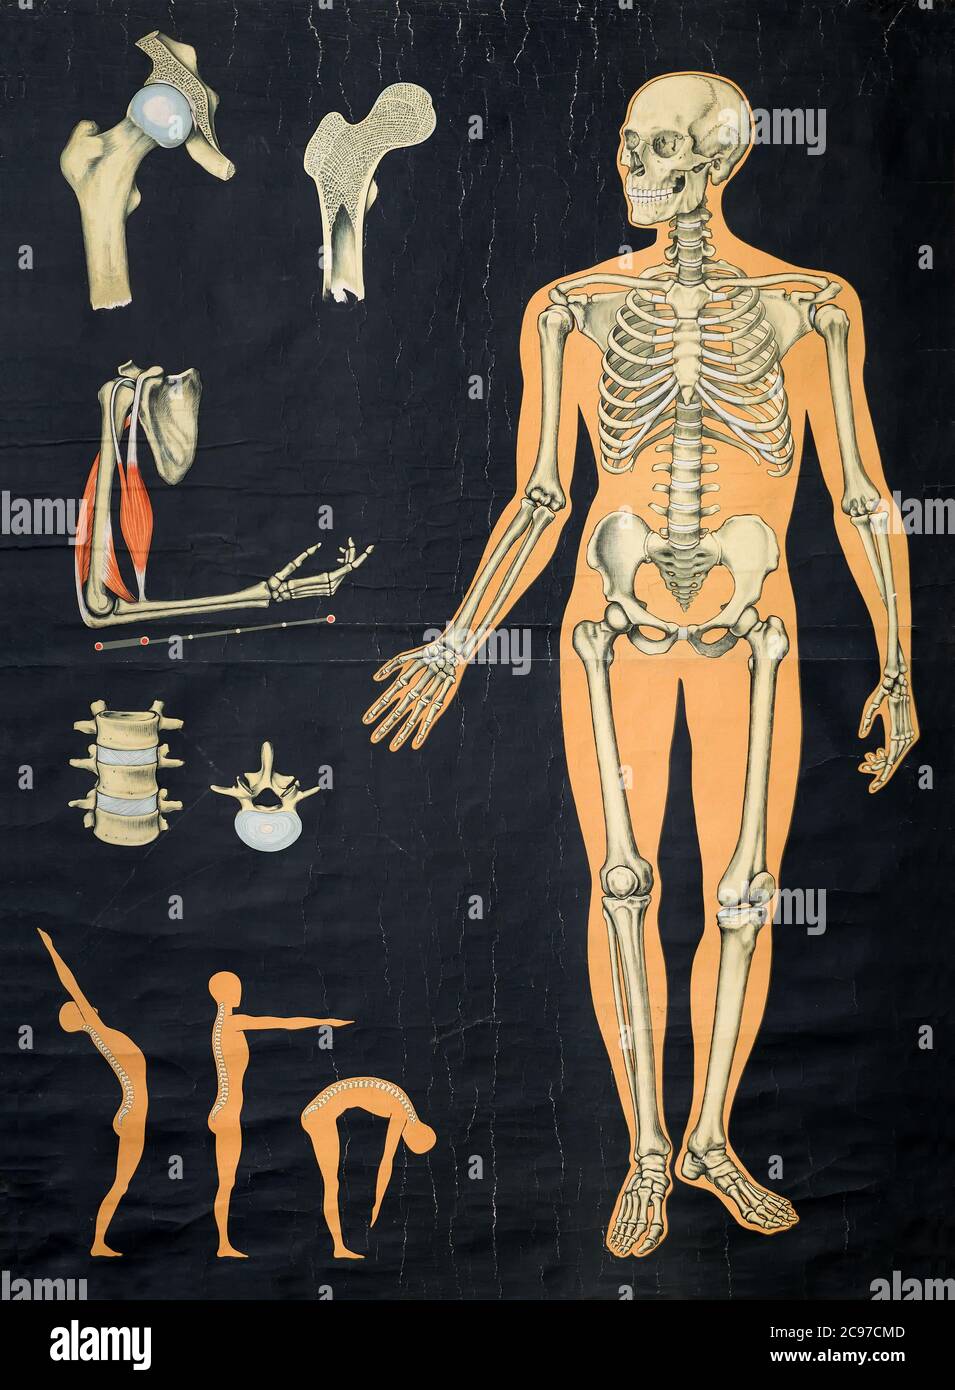 Vintage human anatomy chart showing the skeletal system in a standing figure as well as bone detail to the side Stock Photo